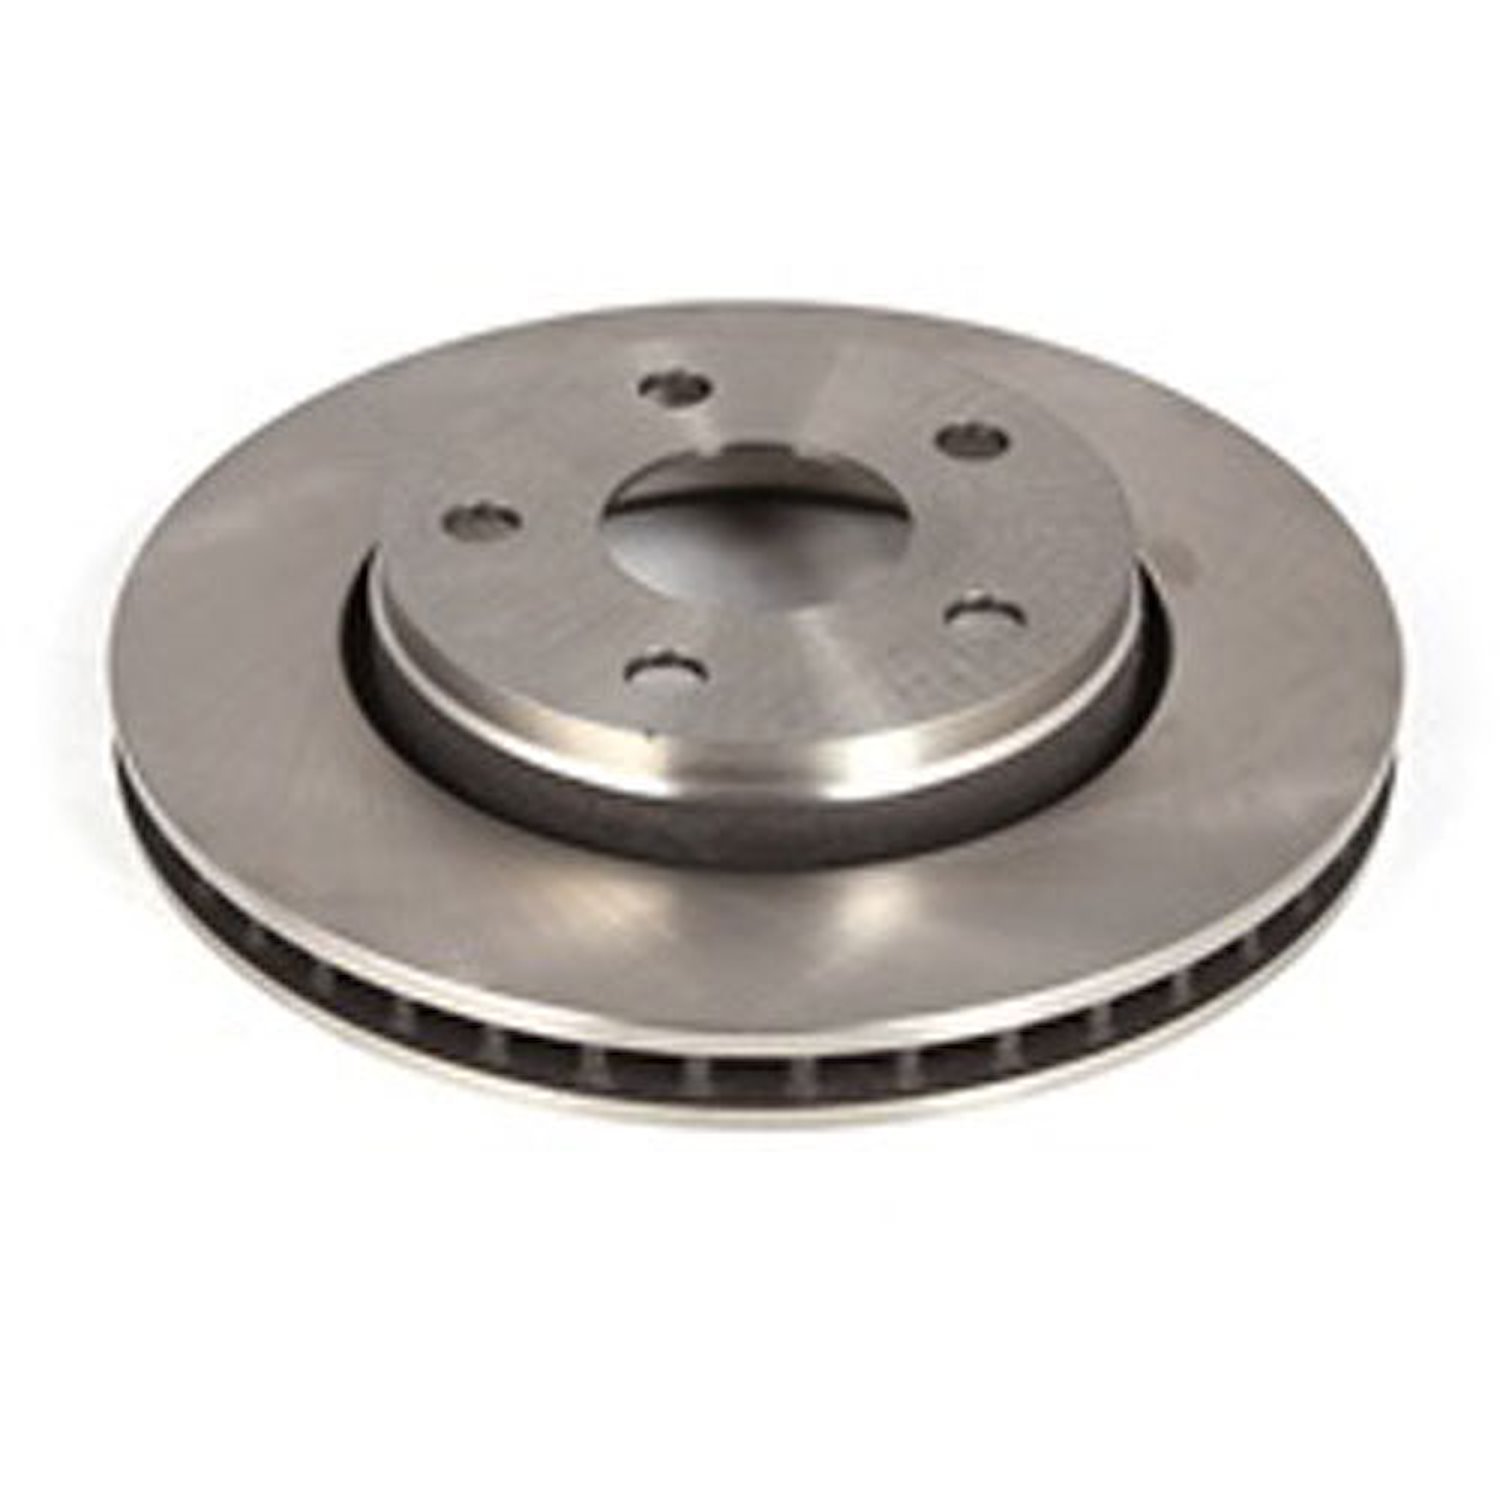 This front brake rotor from Omix-ADA fits 08-11 Jeep Wrangler with the heavy duty BR6 braking system.